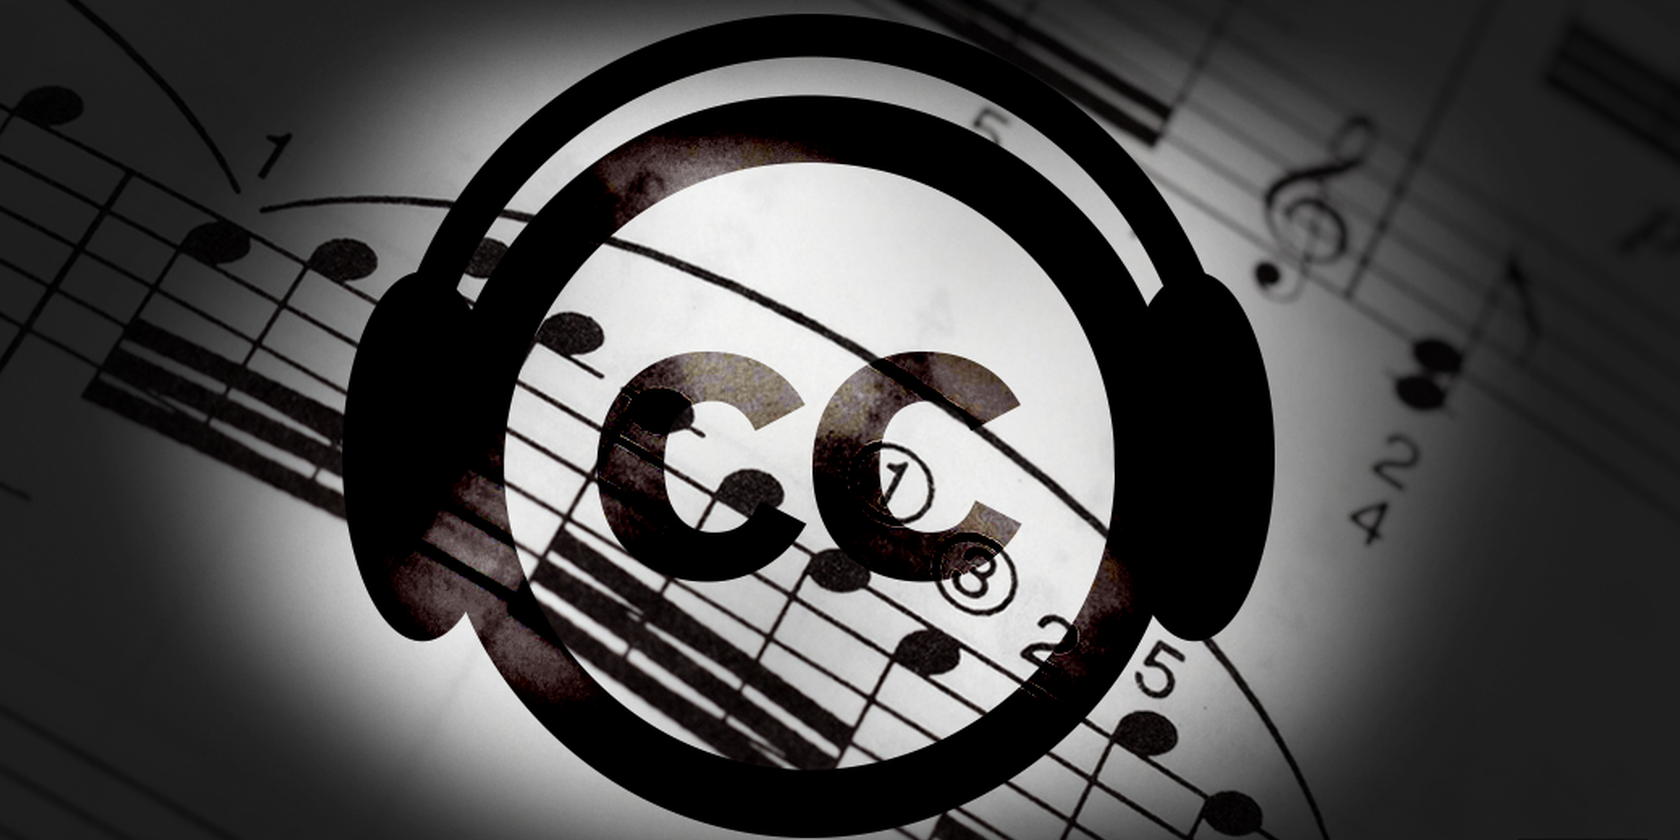 Need A Soundtrack? Download Free Creative Commons Music [Sound Sunday]